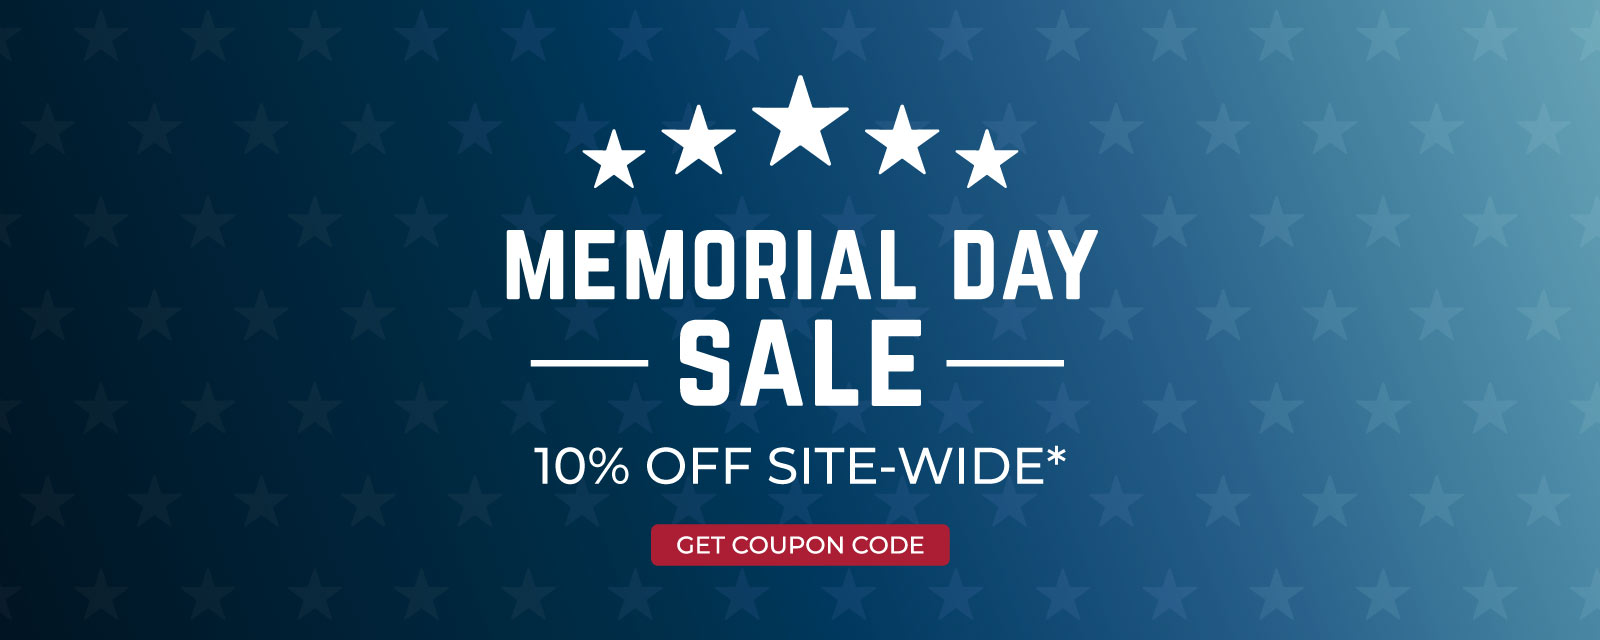 Memorial Day Sale - Click to Get Coupon Code